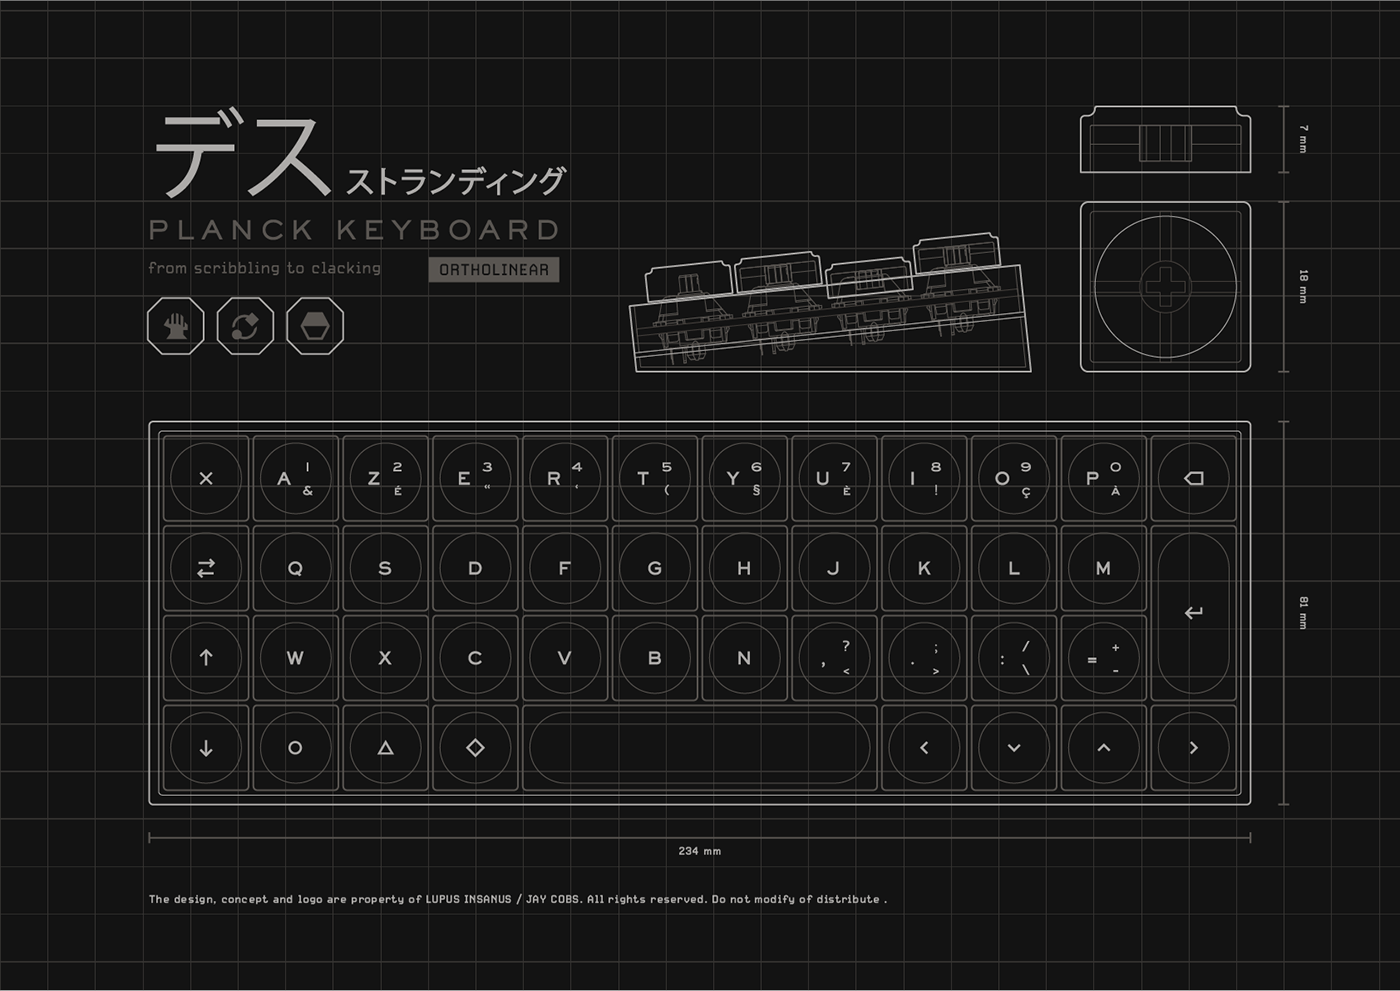 3D CGI Coiled Cable concept Death Stranding keyboard Mechannical Keyboard Ortholinear